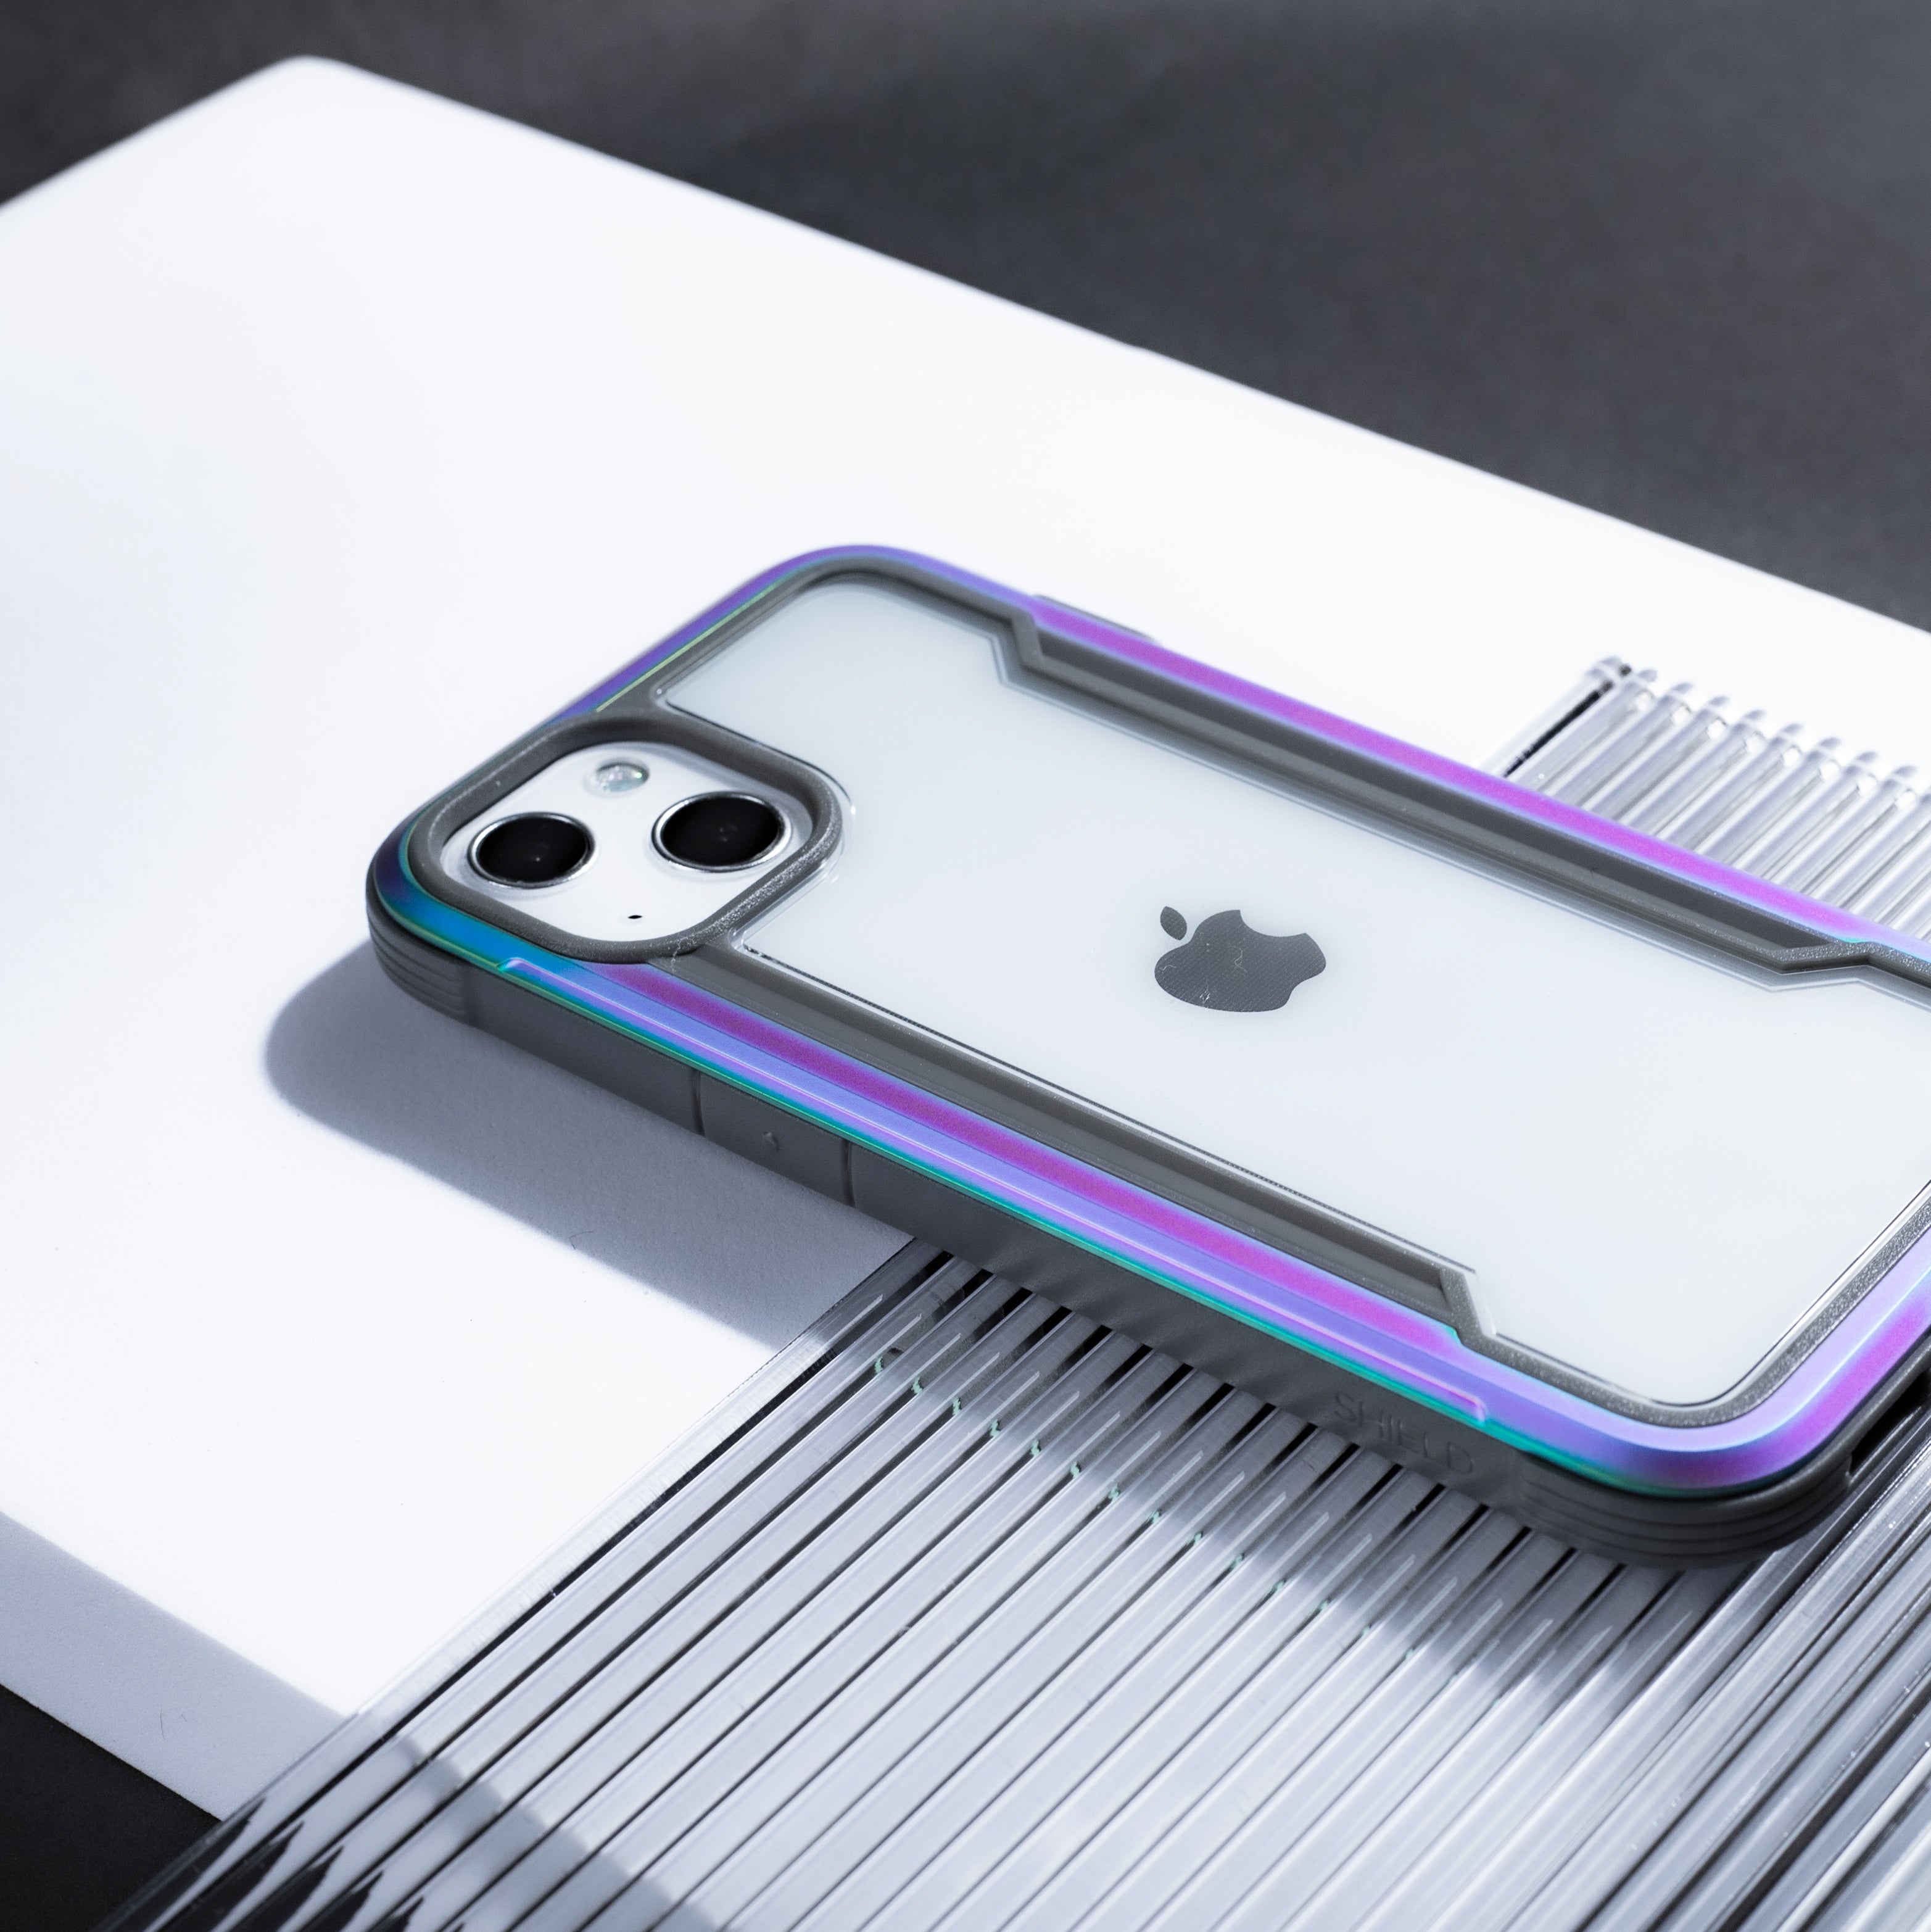 The iPhone 13 Case - SHIELD PRO by Raptic is sitting on top of a table, providing drop protection.